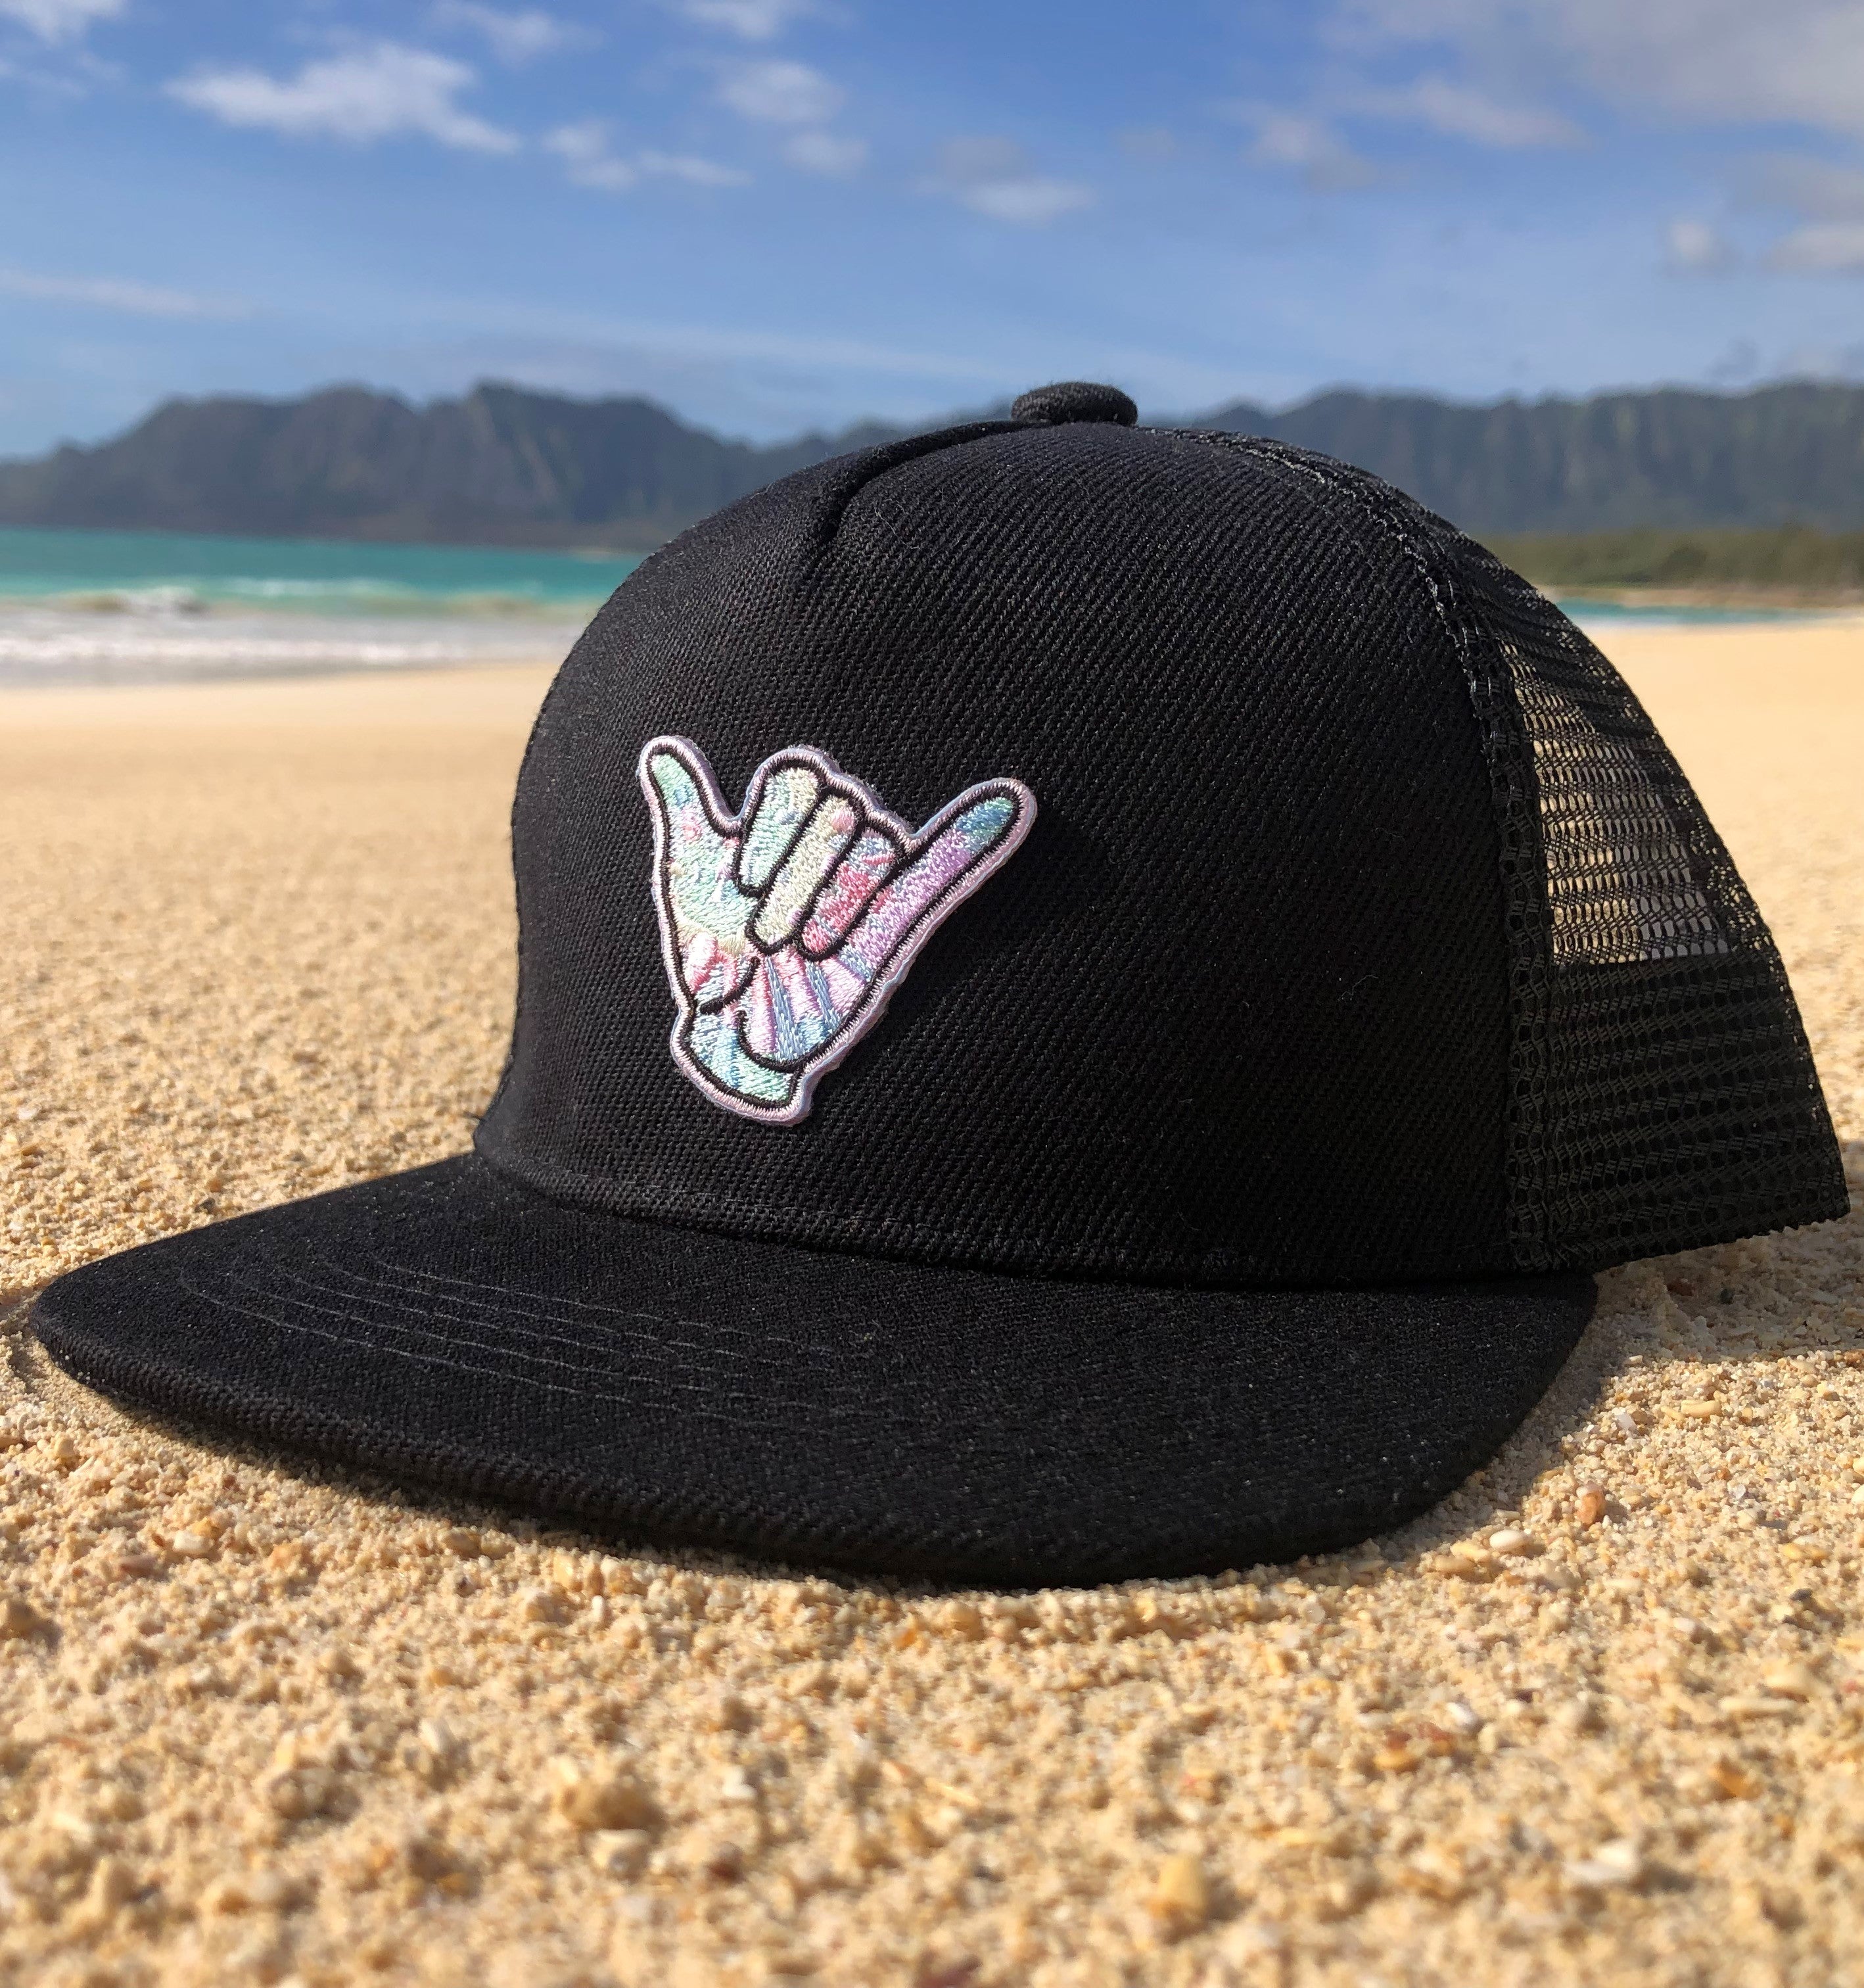 Hang loose trucker hat for toddlers on the beach in the sand by the ocean in Hawaii in the sun copy 1